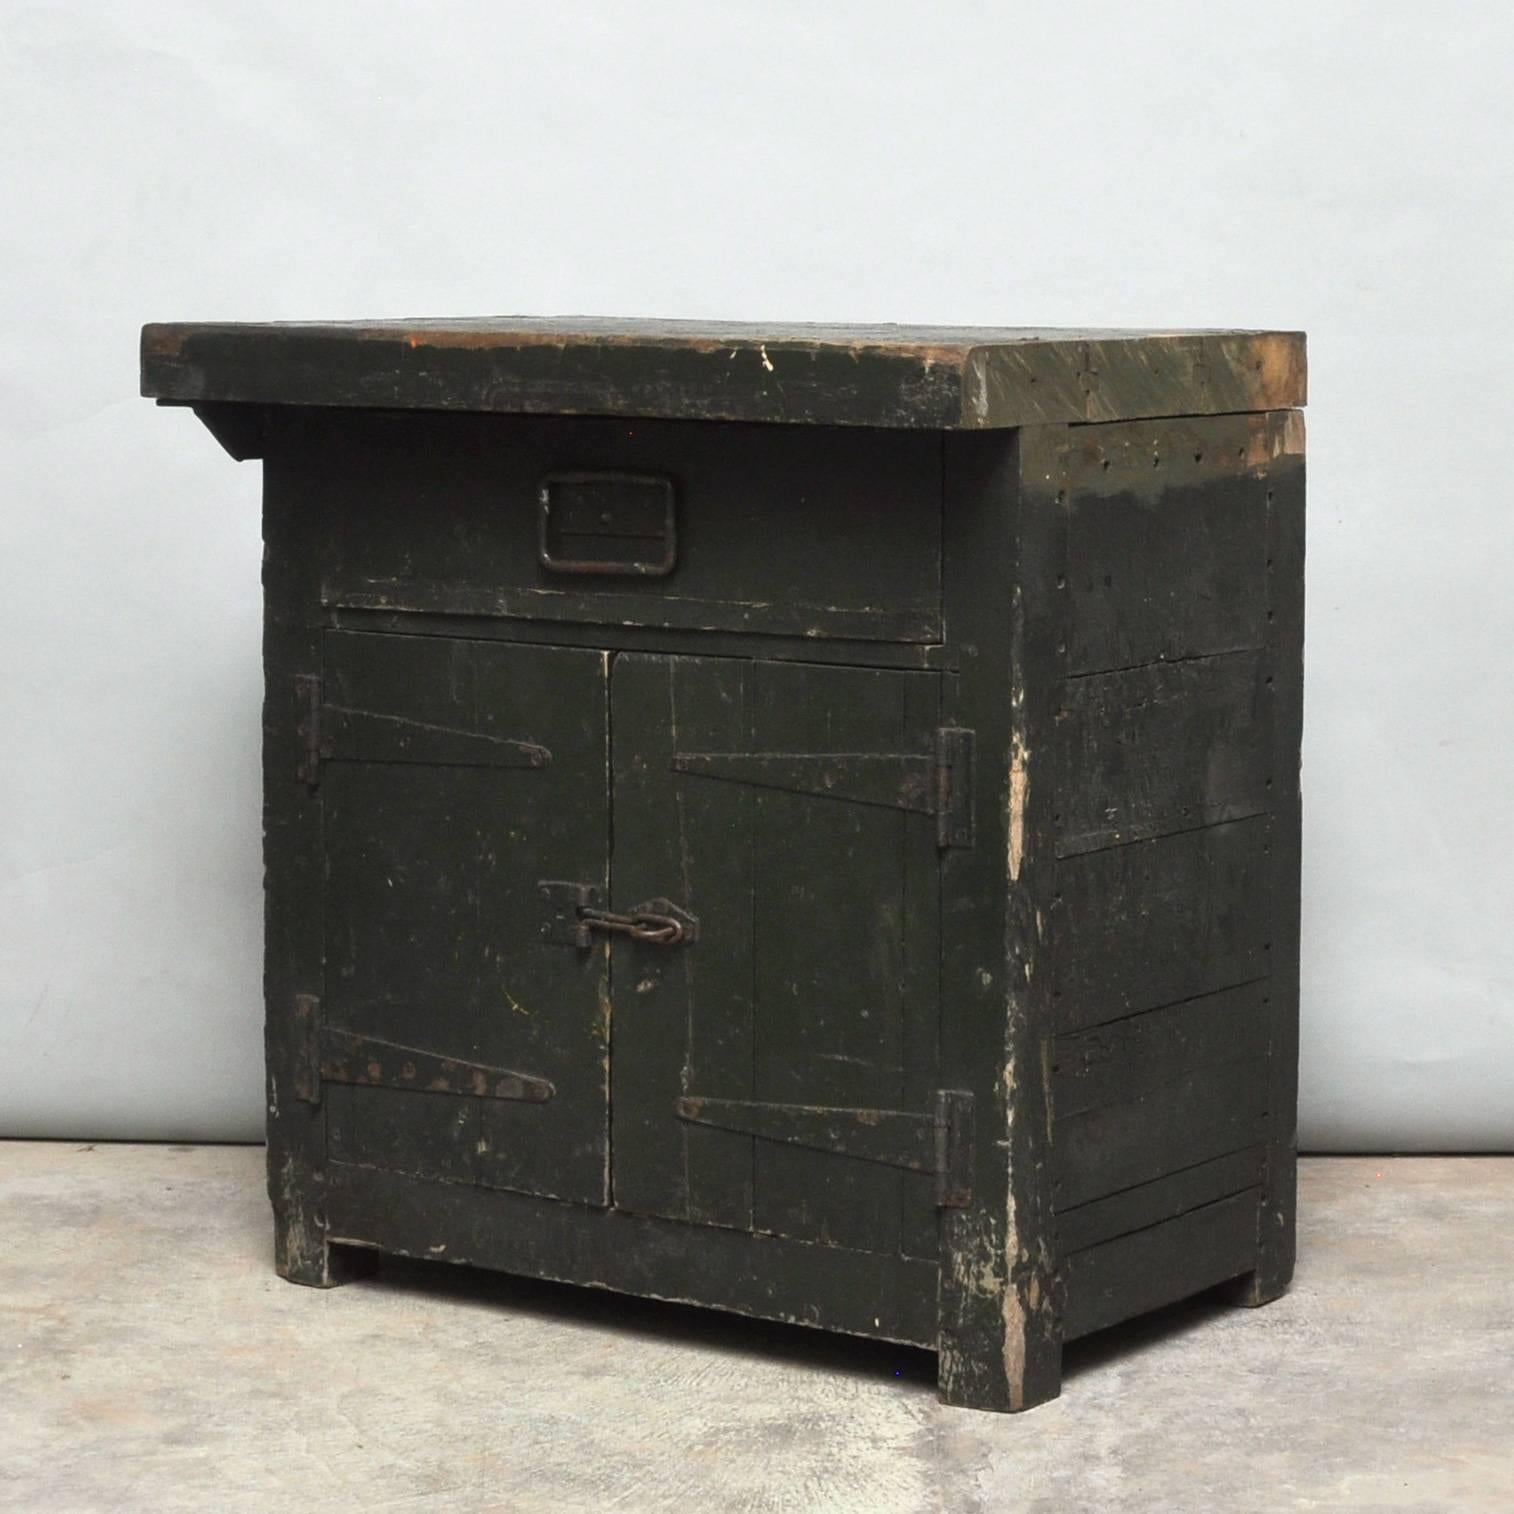 Pine workbench from the 1930s, produced in Germany. Original paint, hinges and lock. Heavy quality.